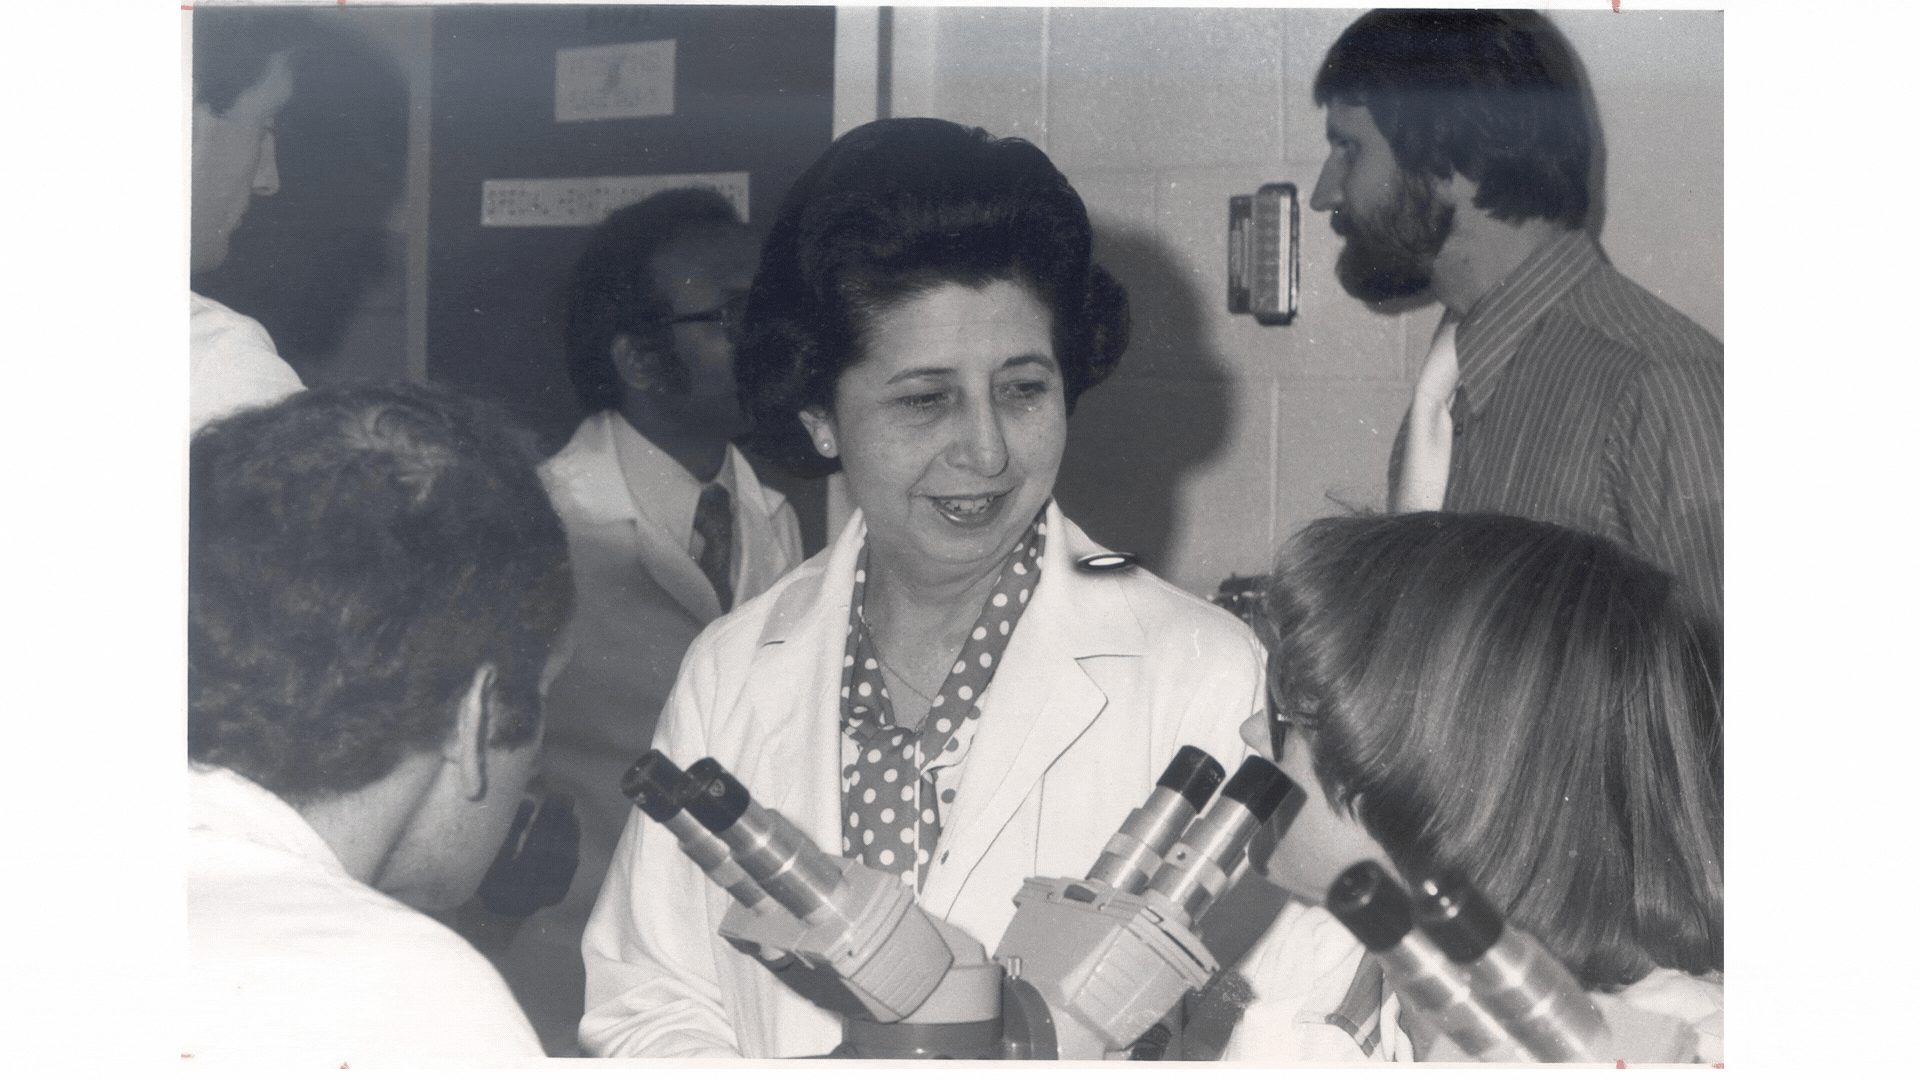 Images of Bertha Bouroncle as a researcher and professor